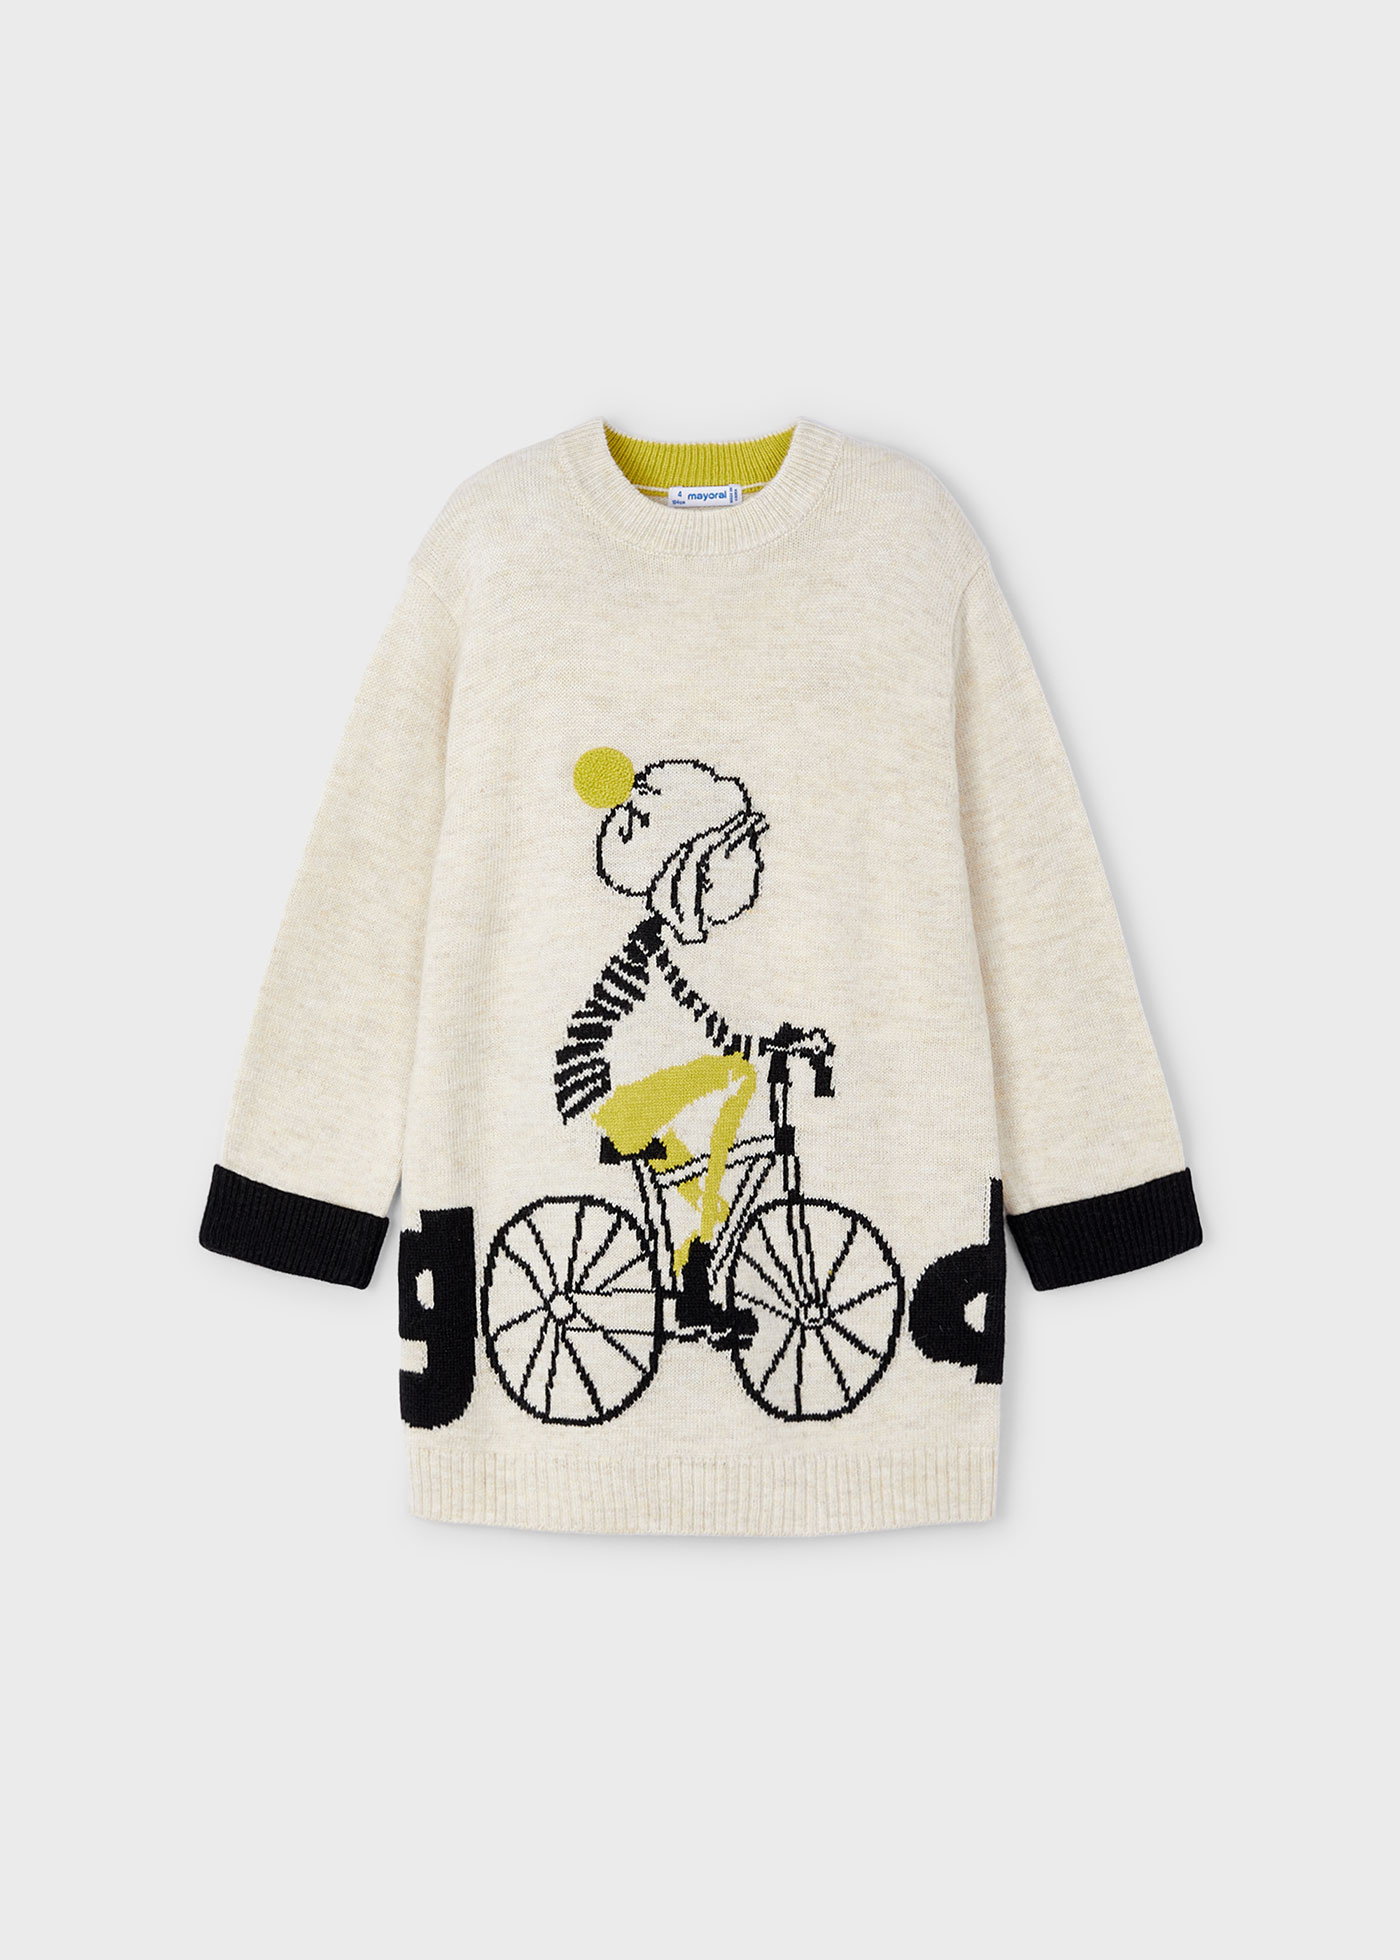 Knit dress bicycle print for girls